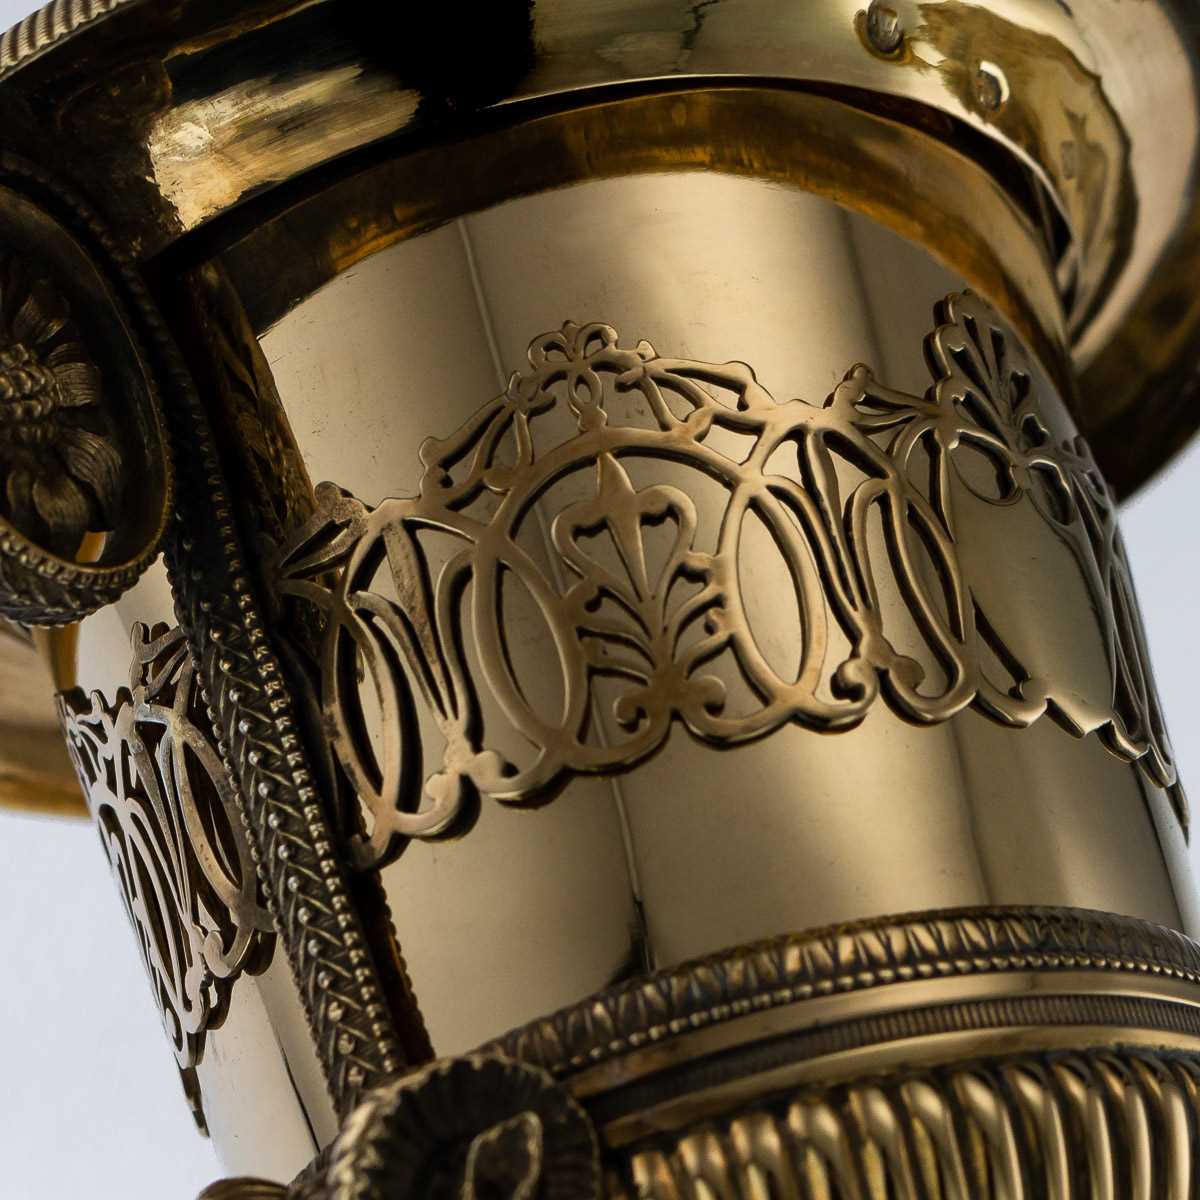 AN EARLY 19TH CENTURY SILVER GILT URN BY MARC JACQUART, PARIS - Image 6 of 19